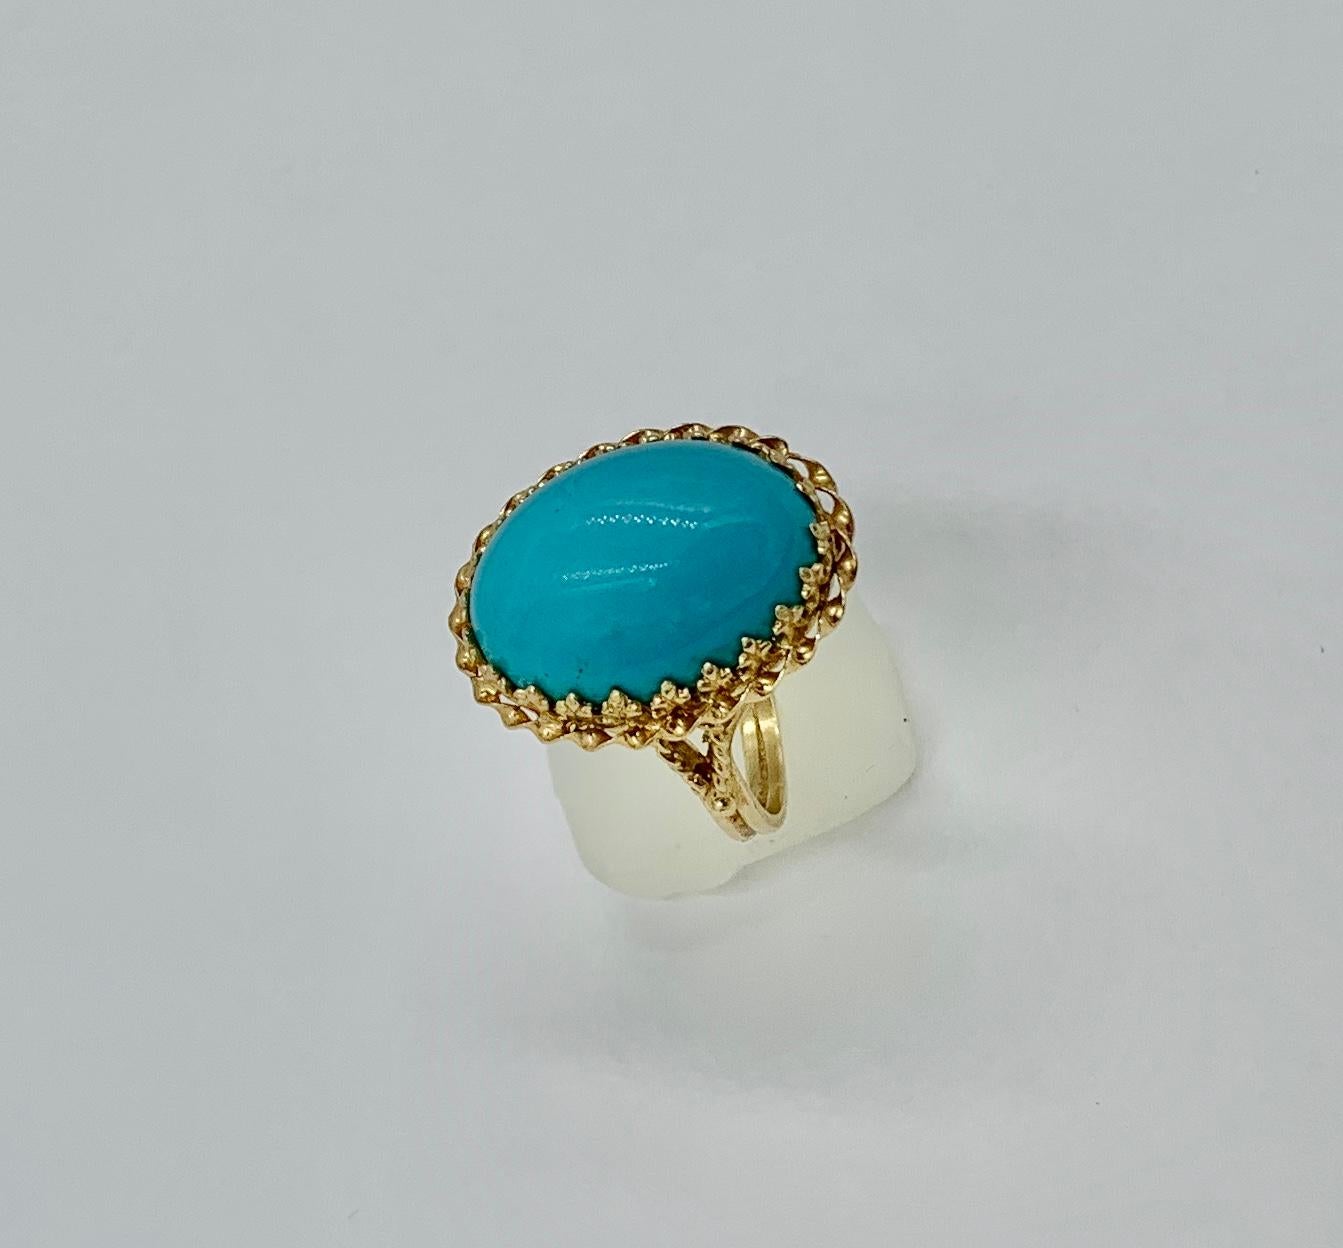 A gorgeous Persian Turquoise Ring with a stunning 14 Carat 18mm Turquoise Cabochon.  The Turquoise is set in a lovely fleur de lit border setting in 14 Karat Yellow Gold.  The vivid oval Turquoise cabochon is of such lovely color and has great